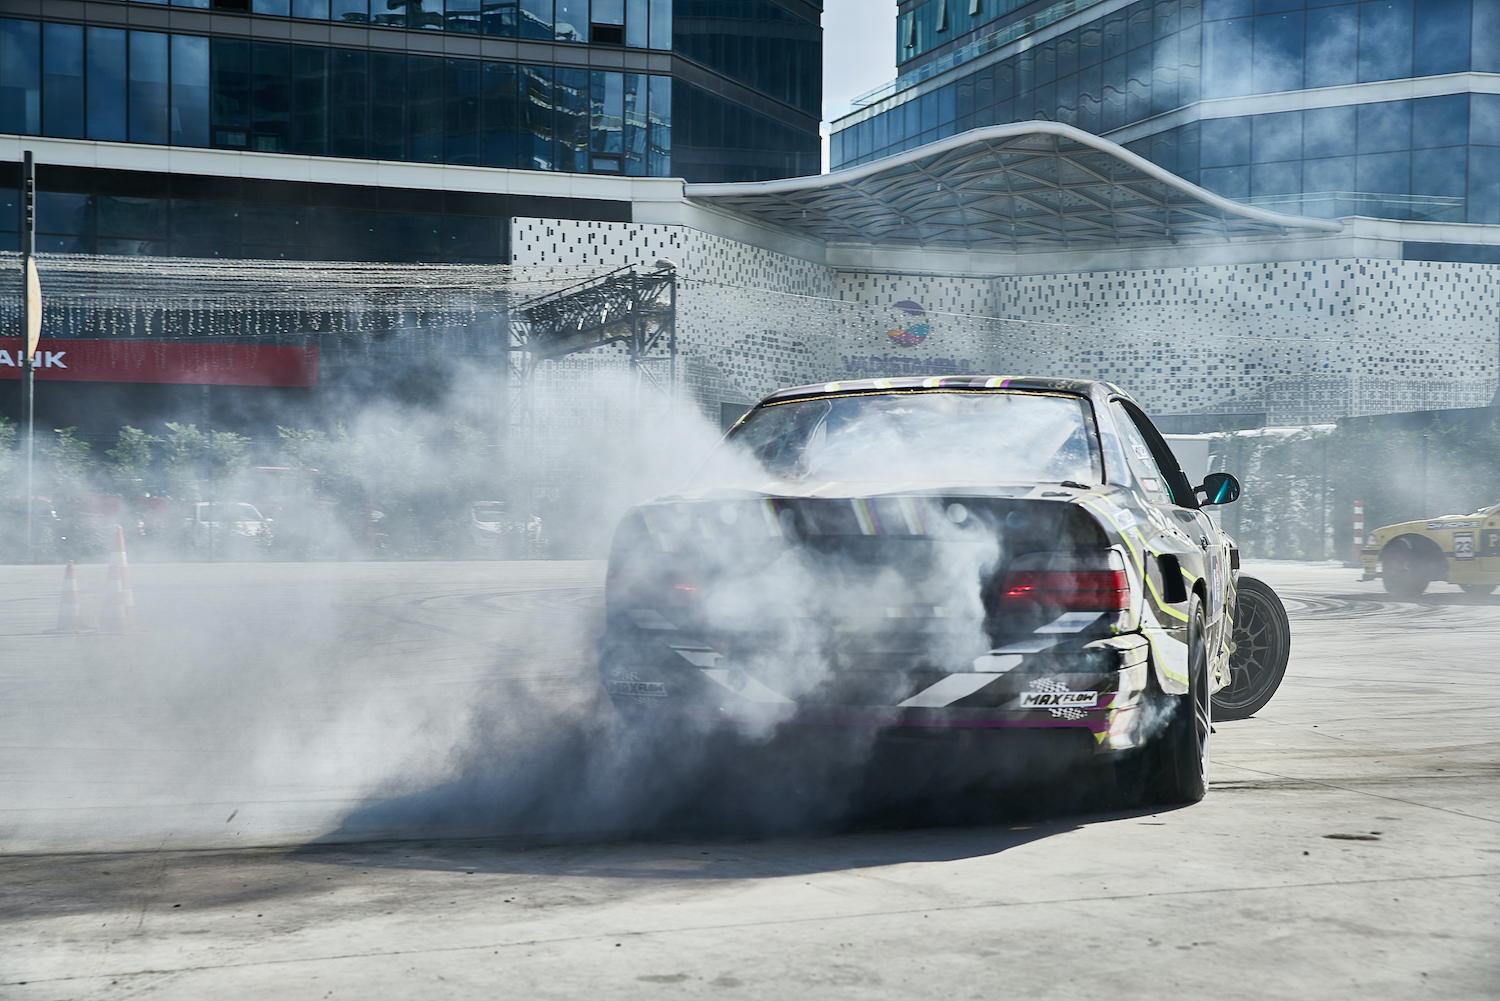 Gray drift car slamming on its brakes and leaving a trail of smoke behind it